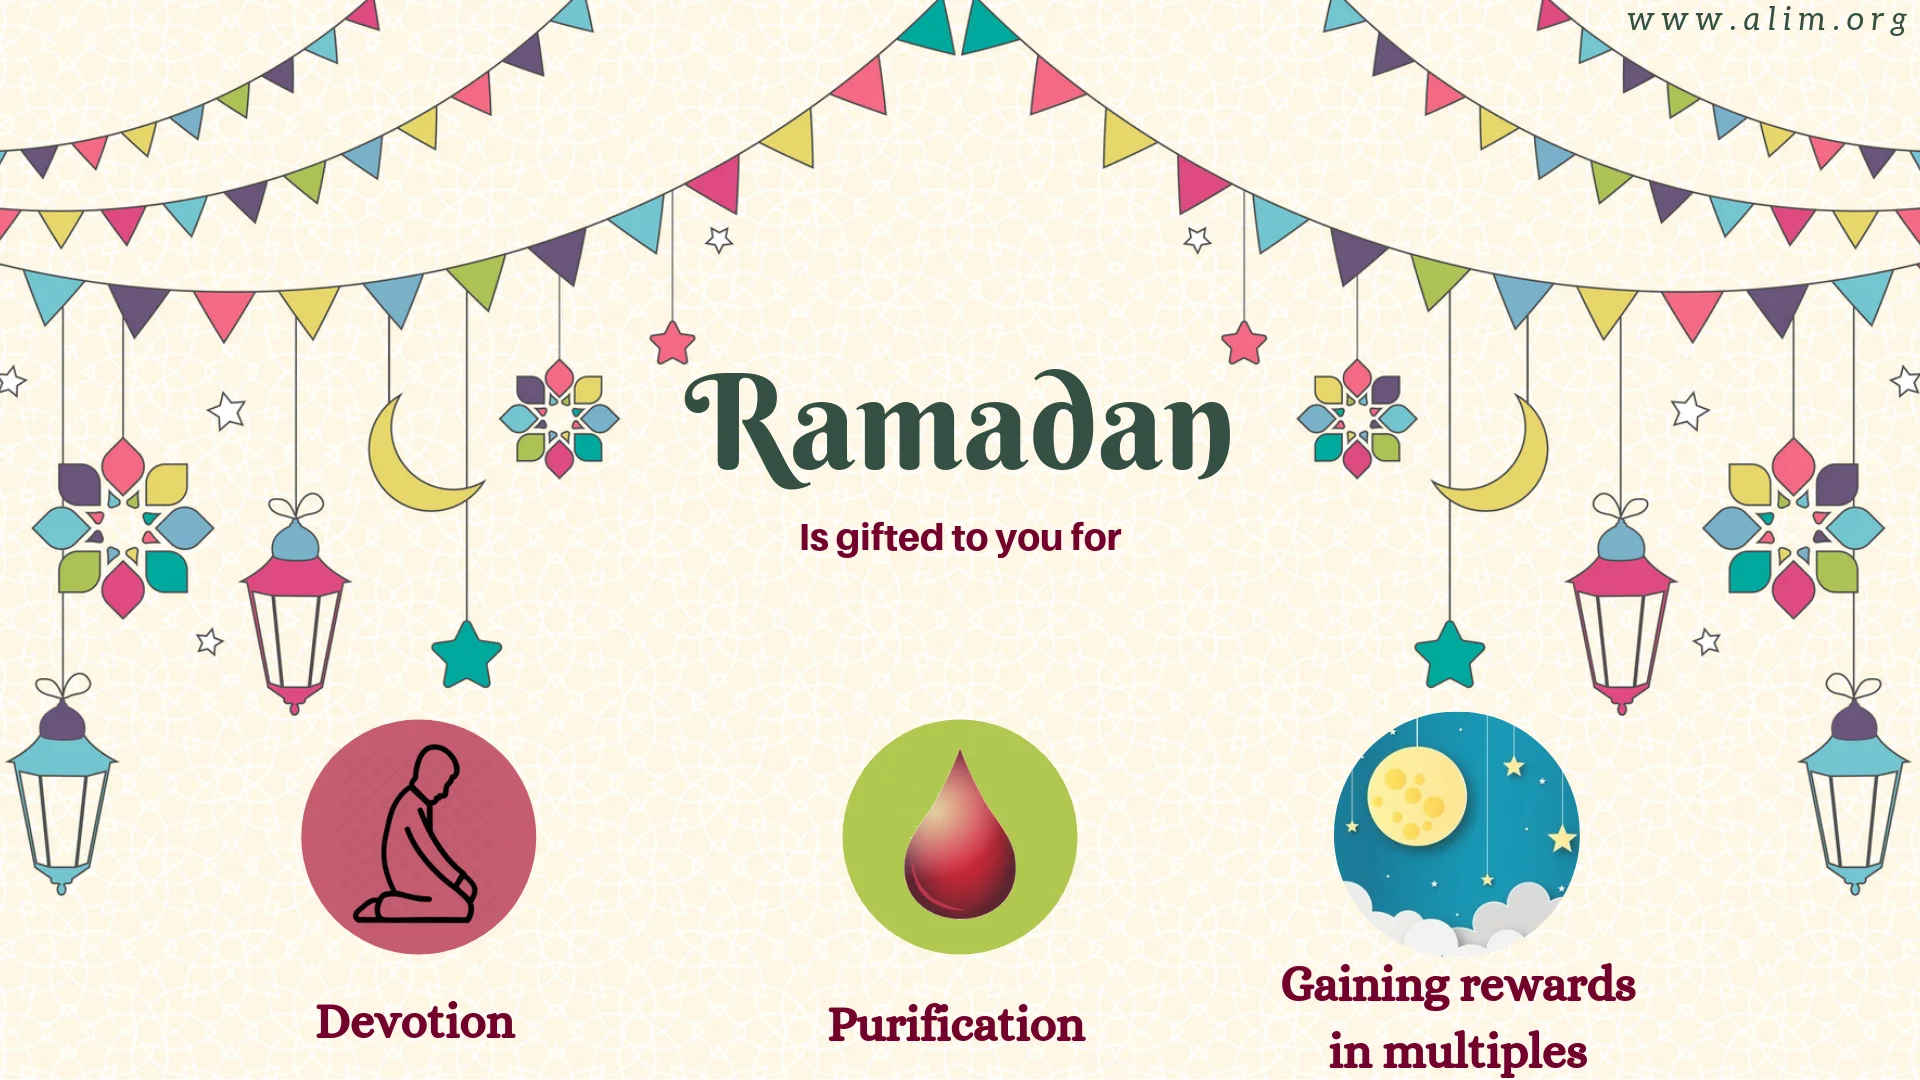 Ramadan is gifted for...